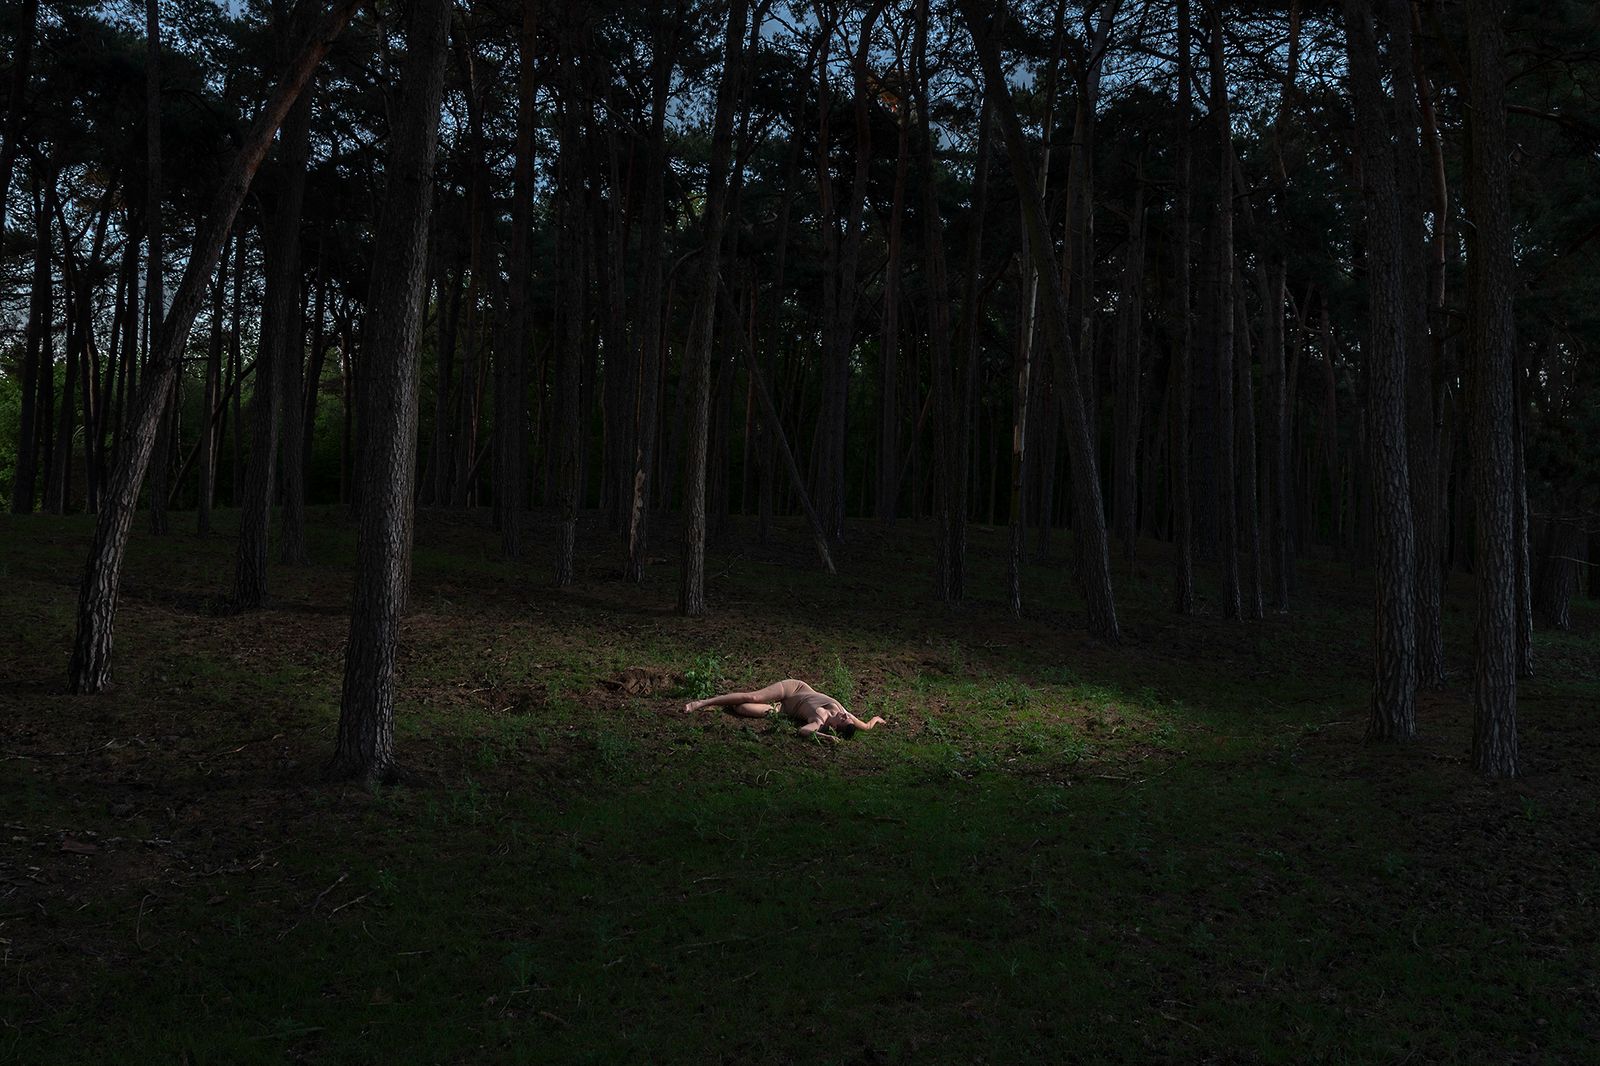 © Lina Van Hulle - Image from the Second Sun photography project